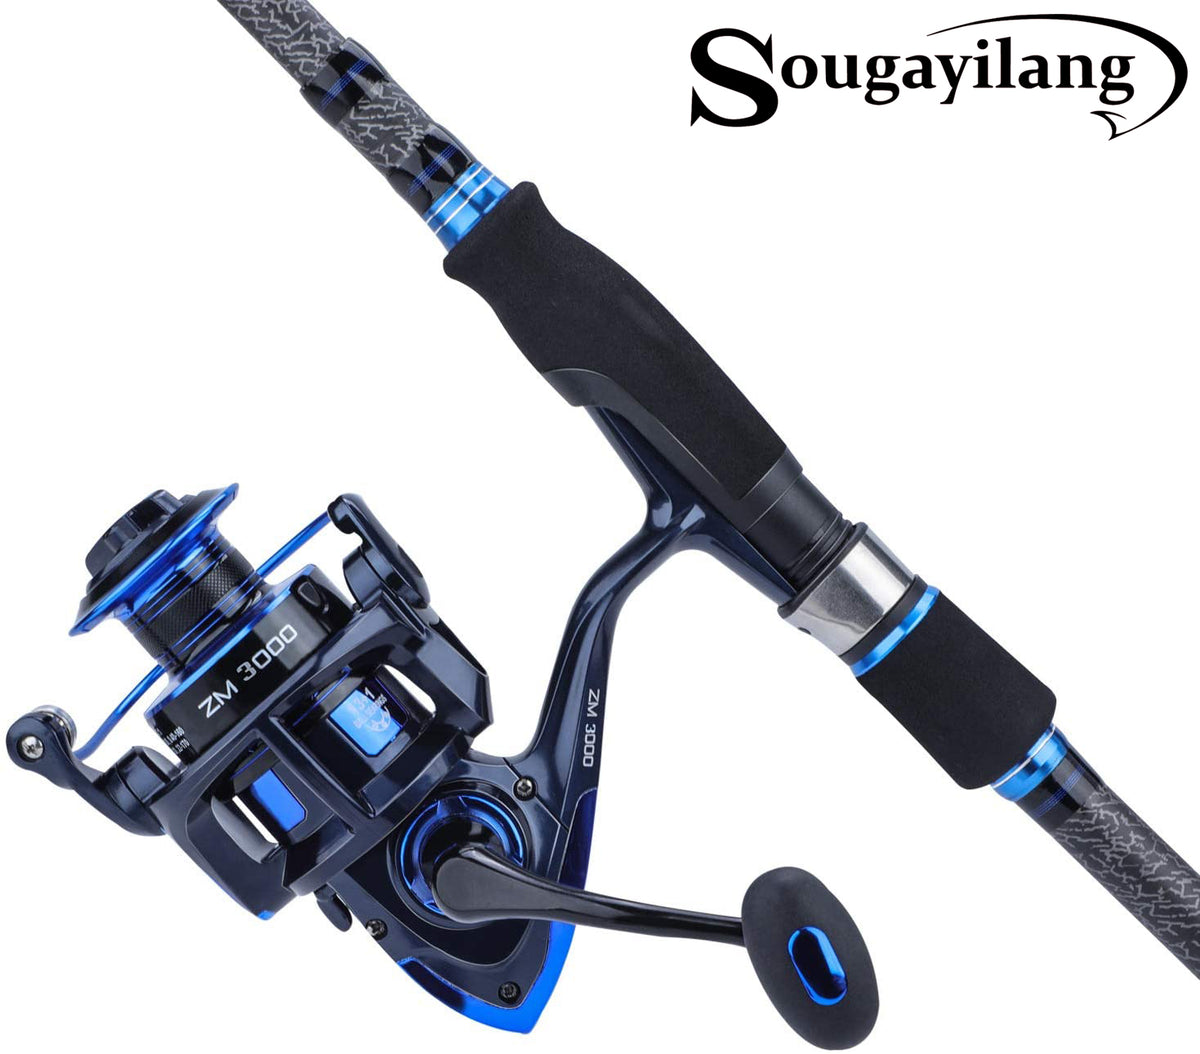 Sougayilang Telescopic Fishing Rod and Reel Combos with Lightweight 24-Ton  Graphite Rod and Spinning reels